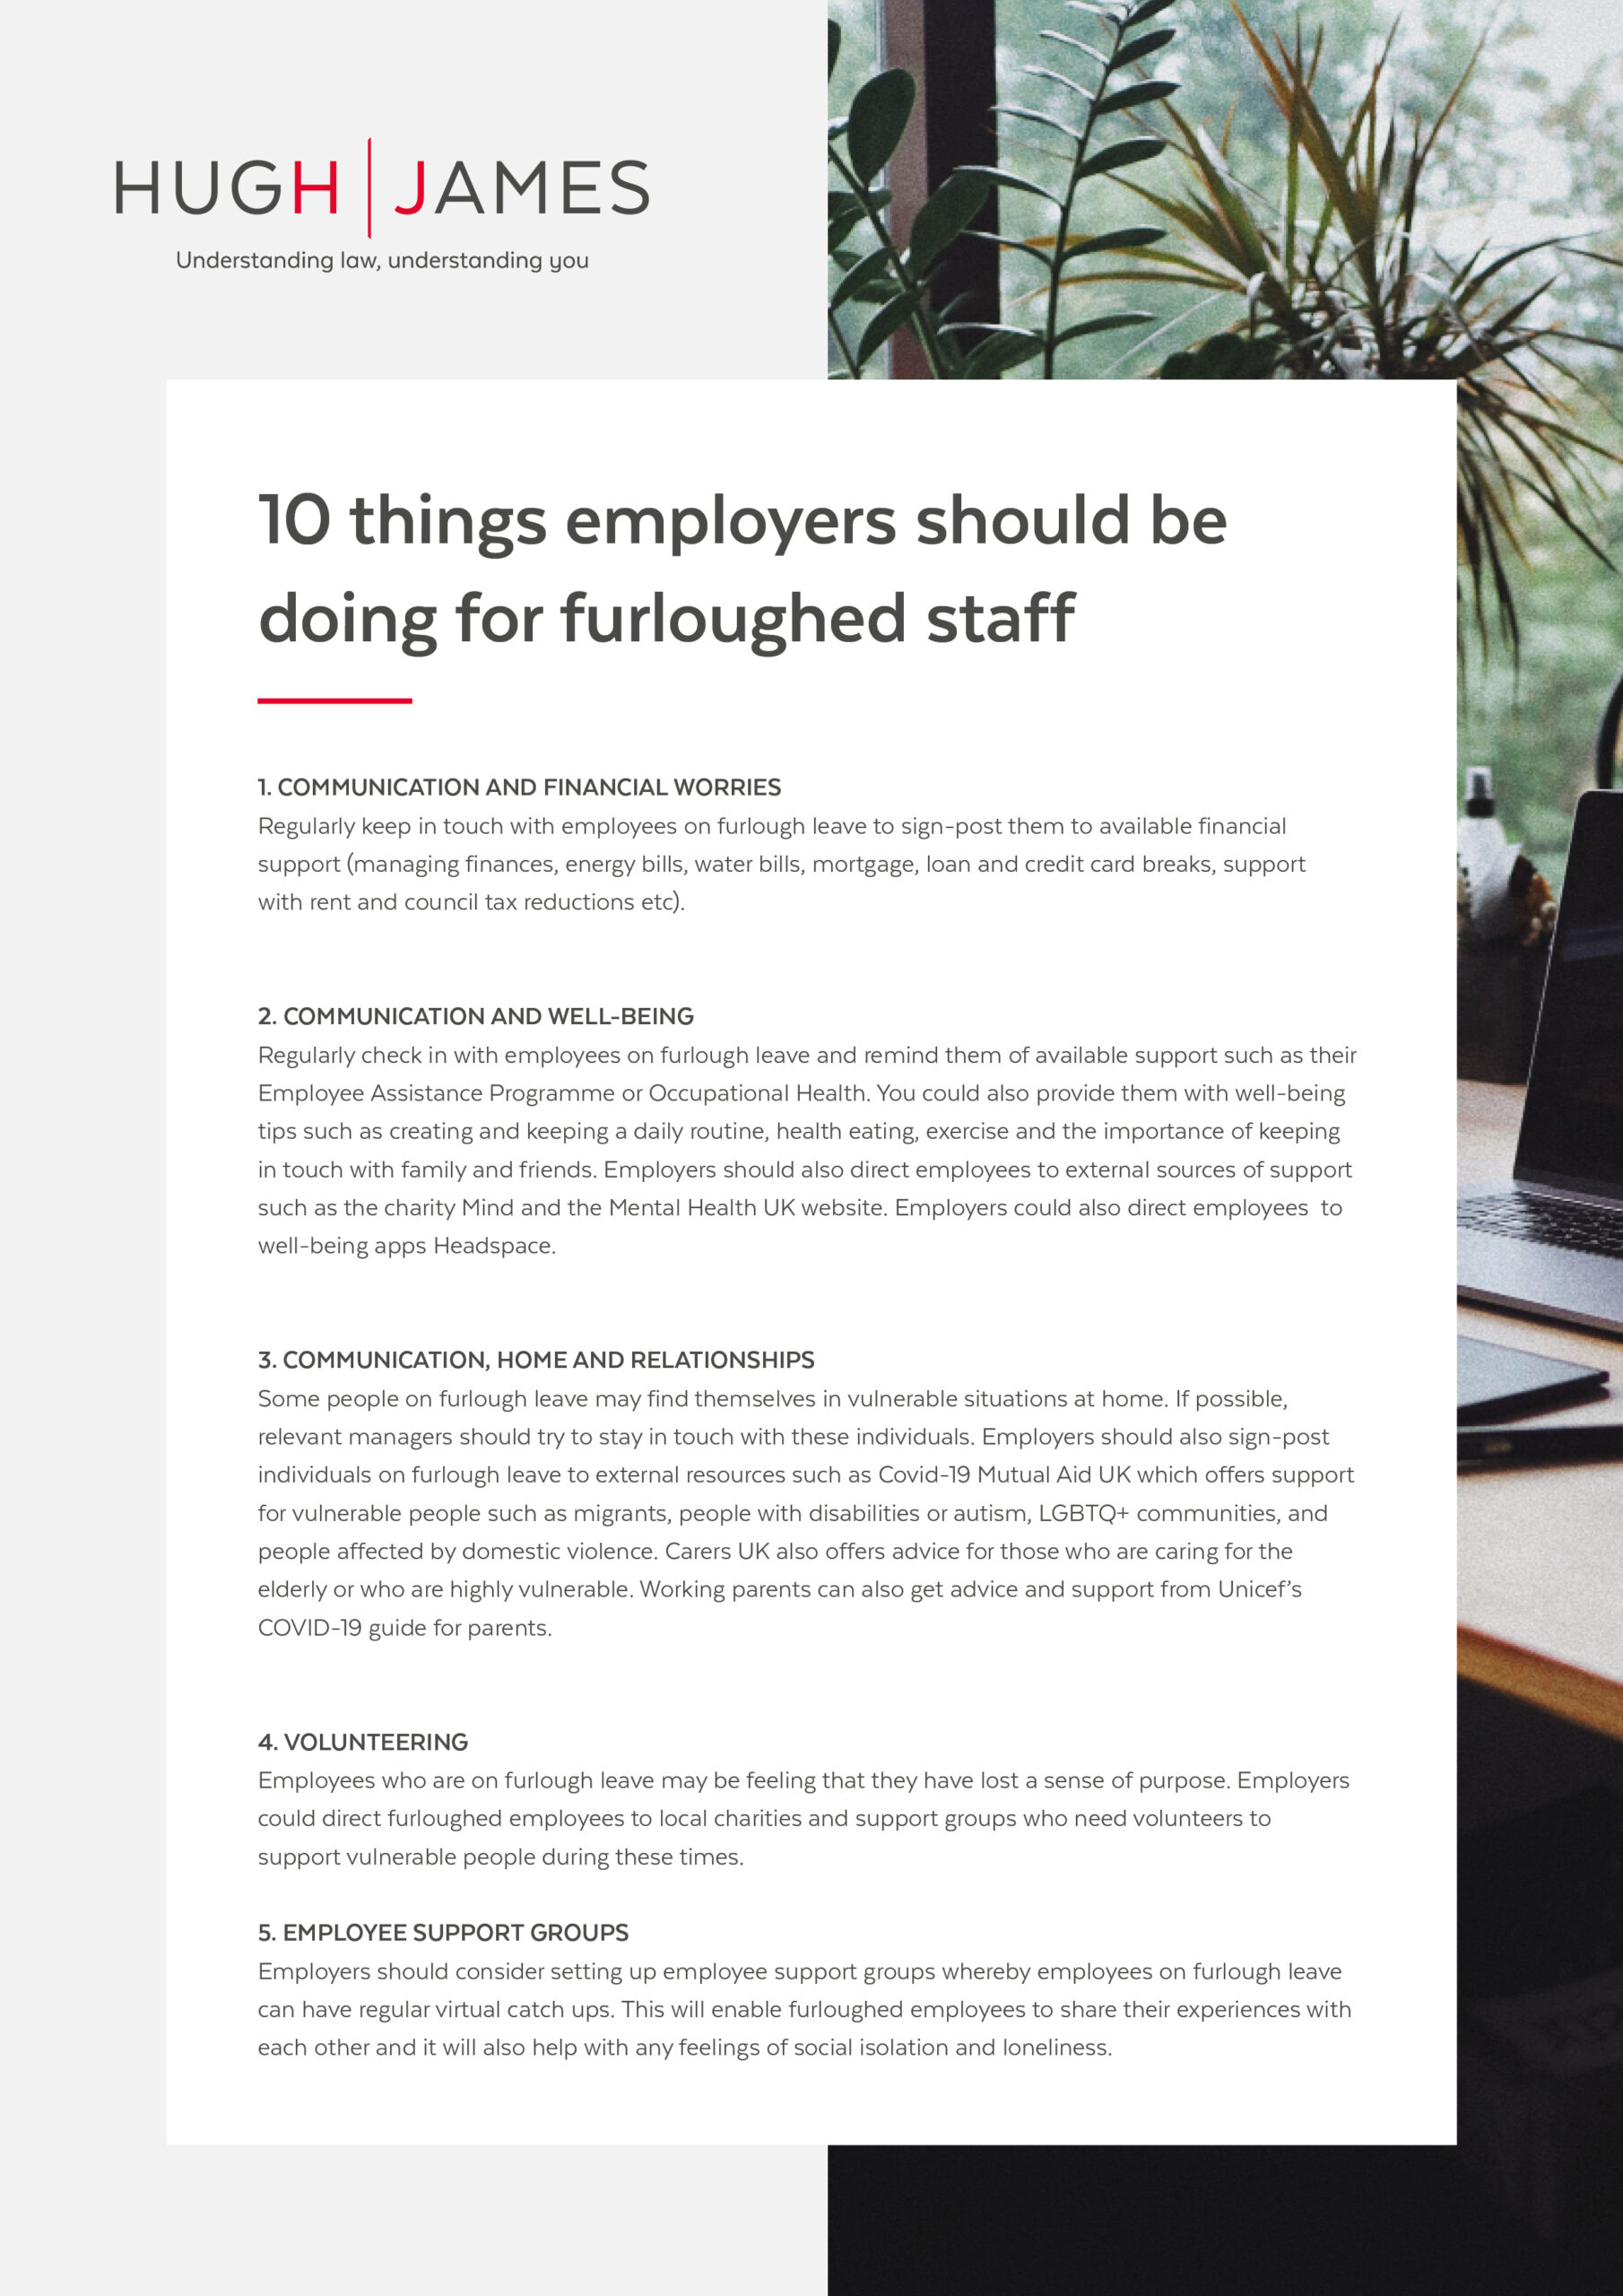 10 things employers should be doing for furloughed staff | Hugh James